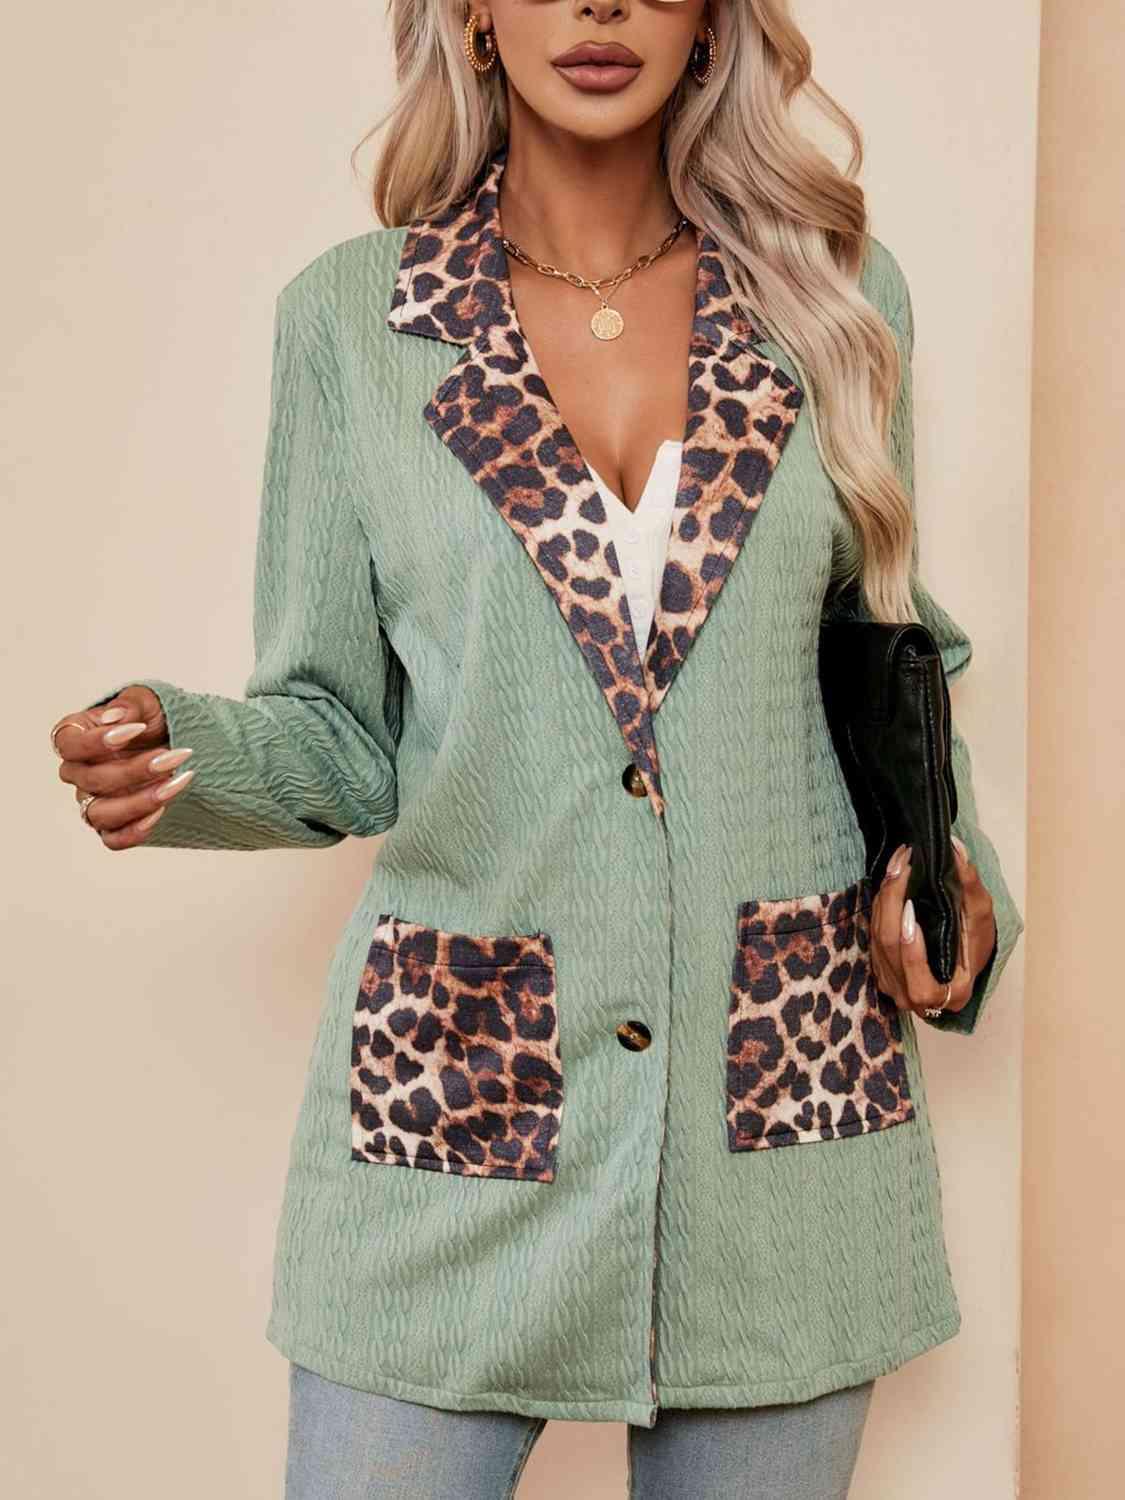 a woman wearing a green jacket with leopard print